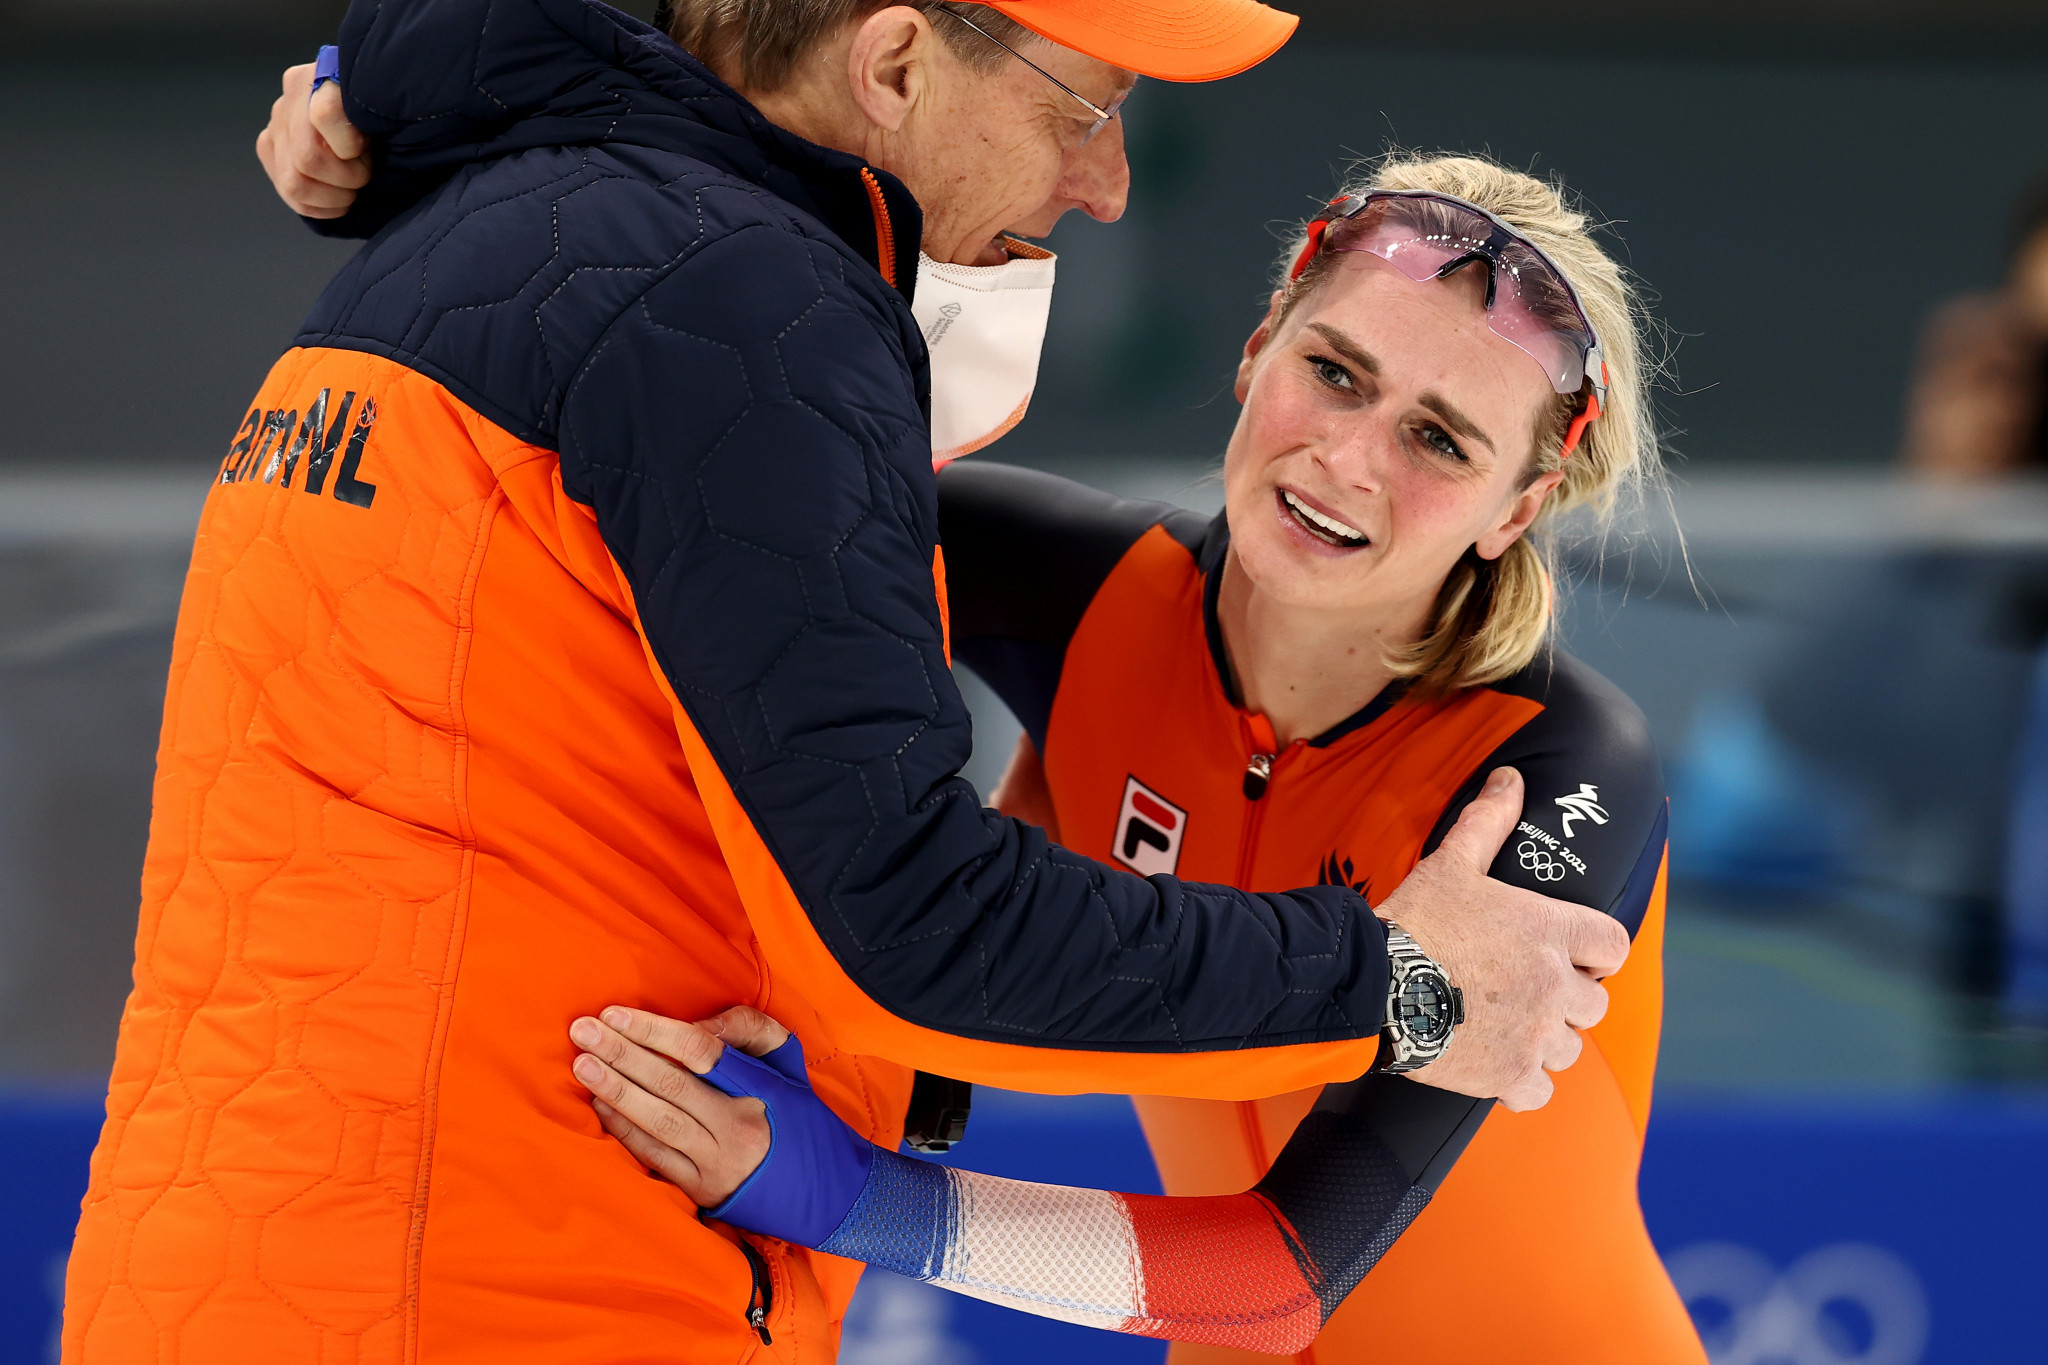 The Netherlands' Irene Schouten could not control her emotions after winning the women’s 3,000m speed skating gold, setting a new Olympic record of 3min 56.93sec ©Getty Images